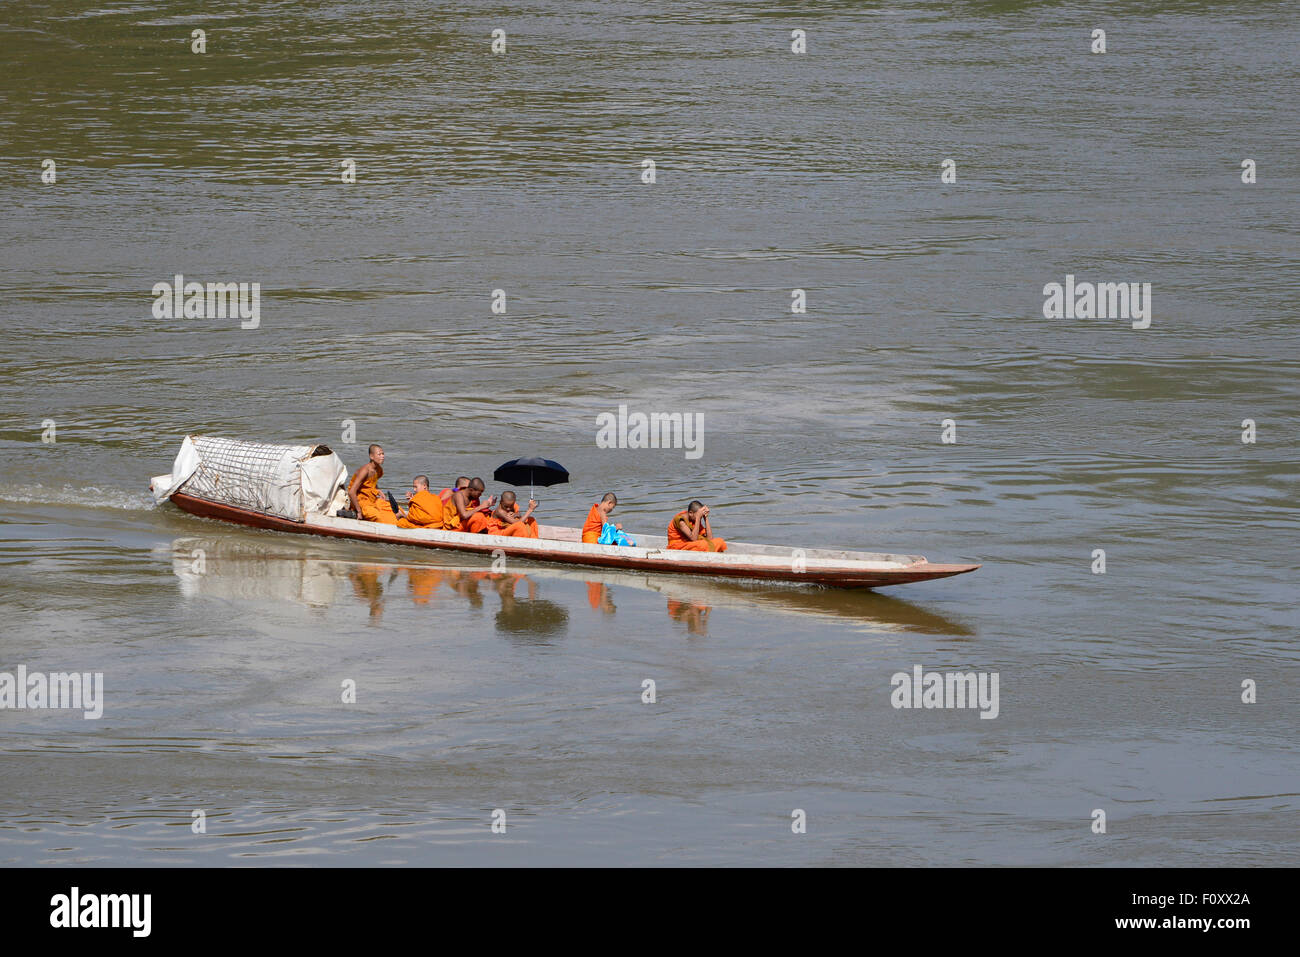 Buddhist monks crossing the river by boat Stock Photo